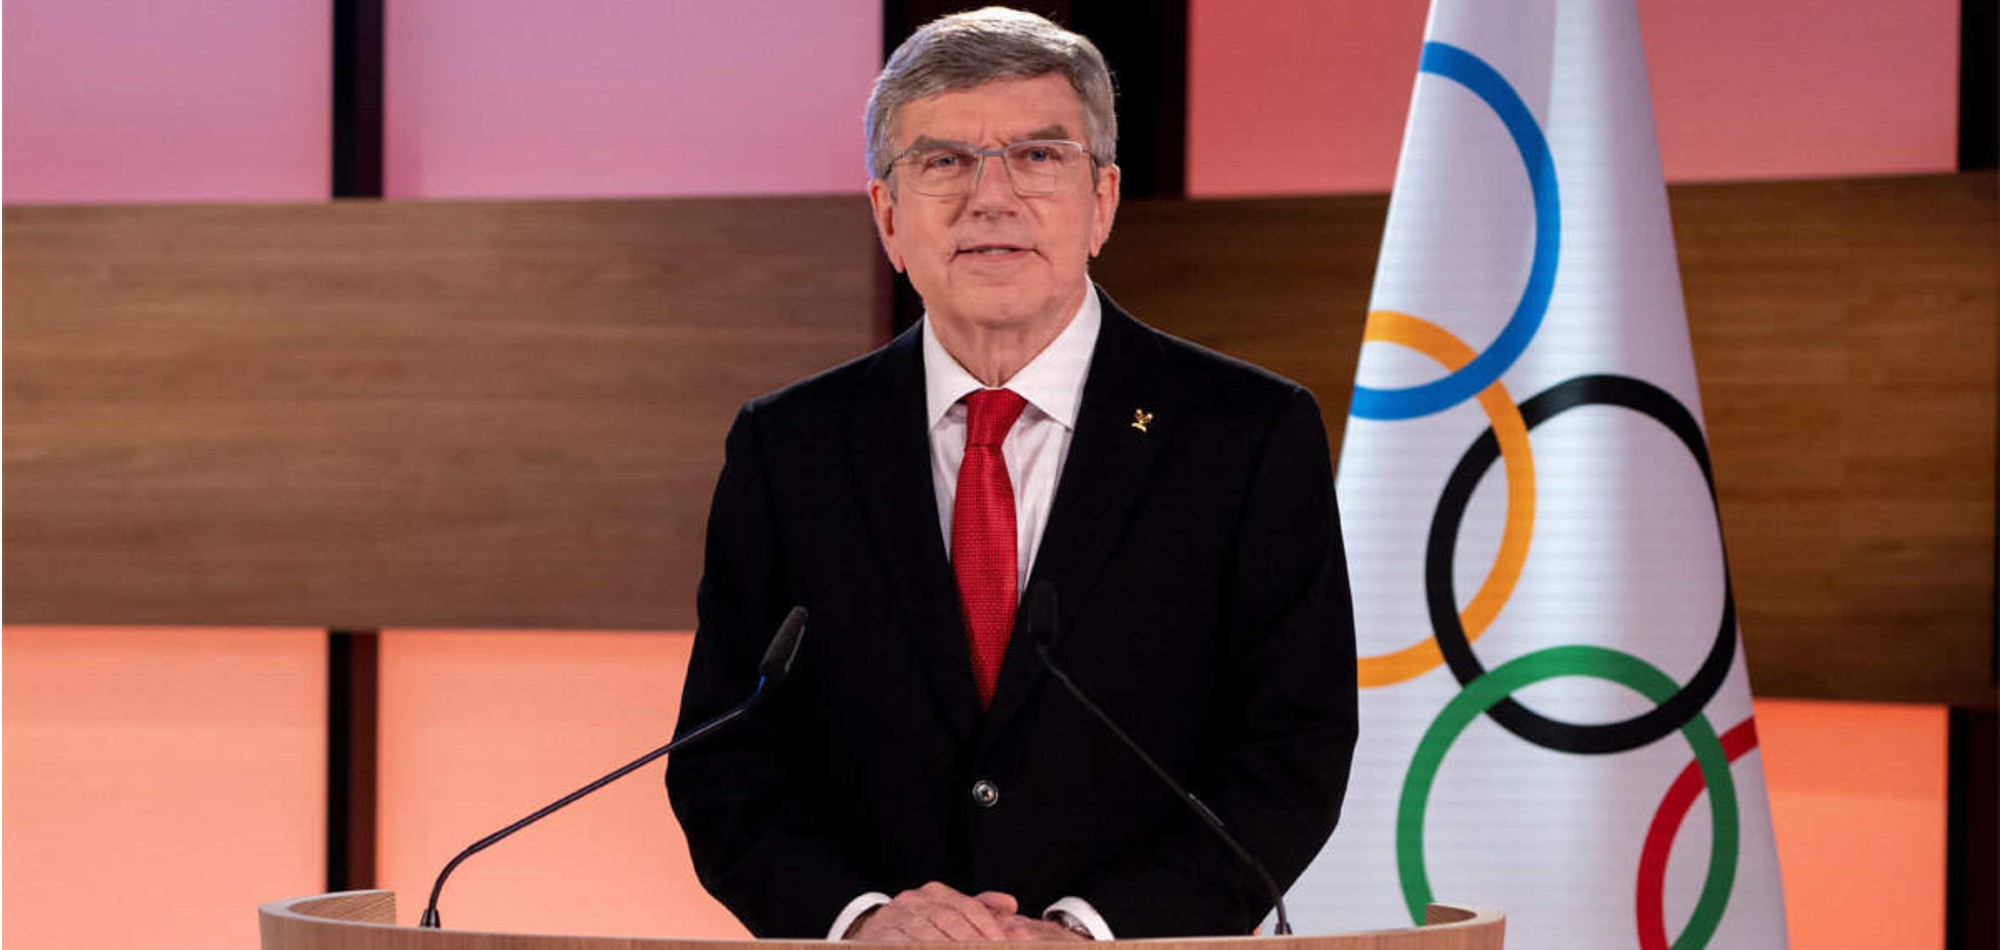 IOC President Bach wins unopposed second term to 2025